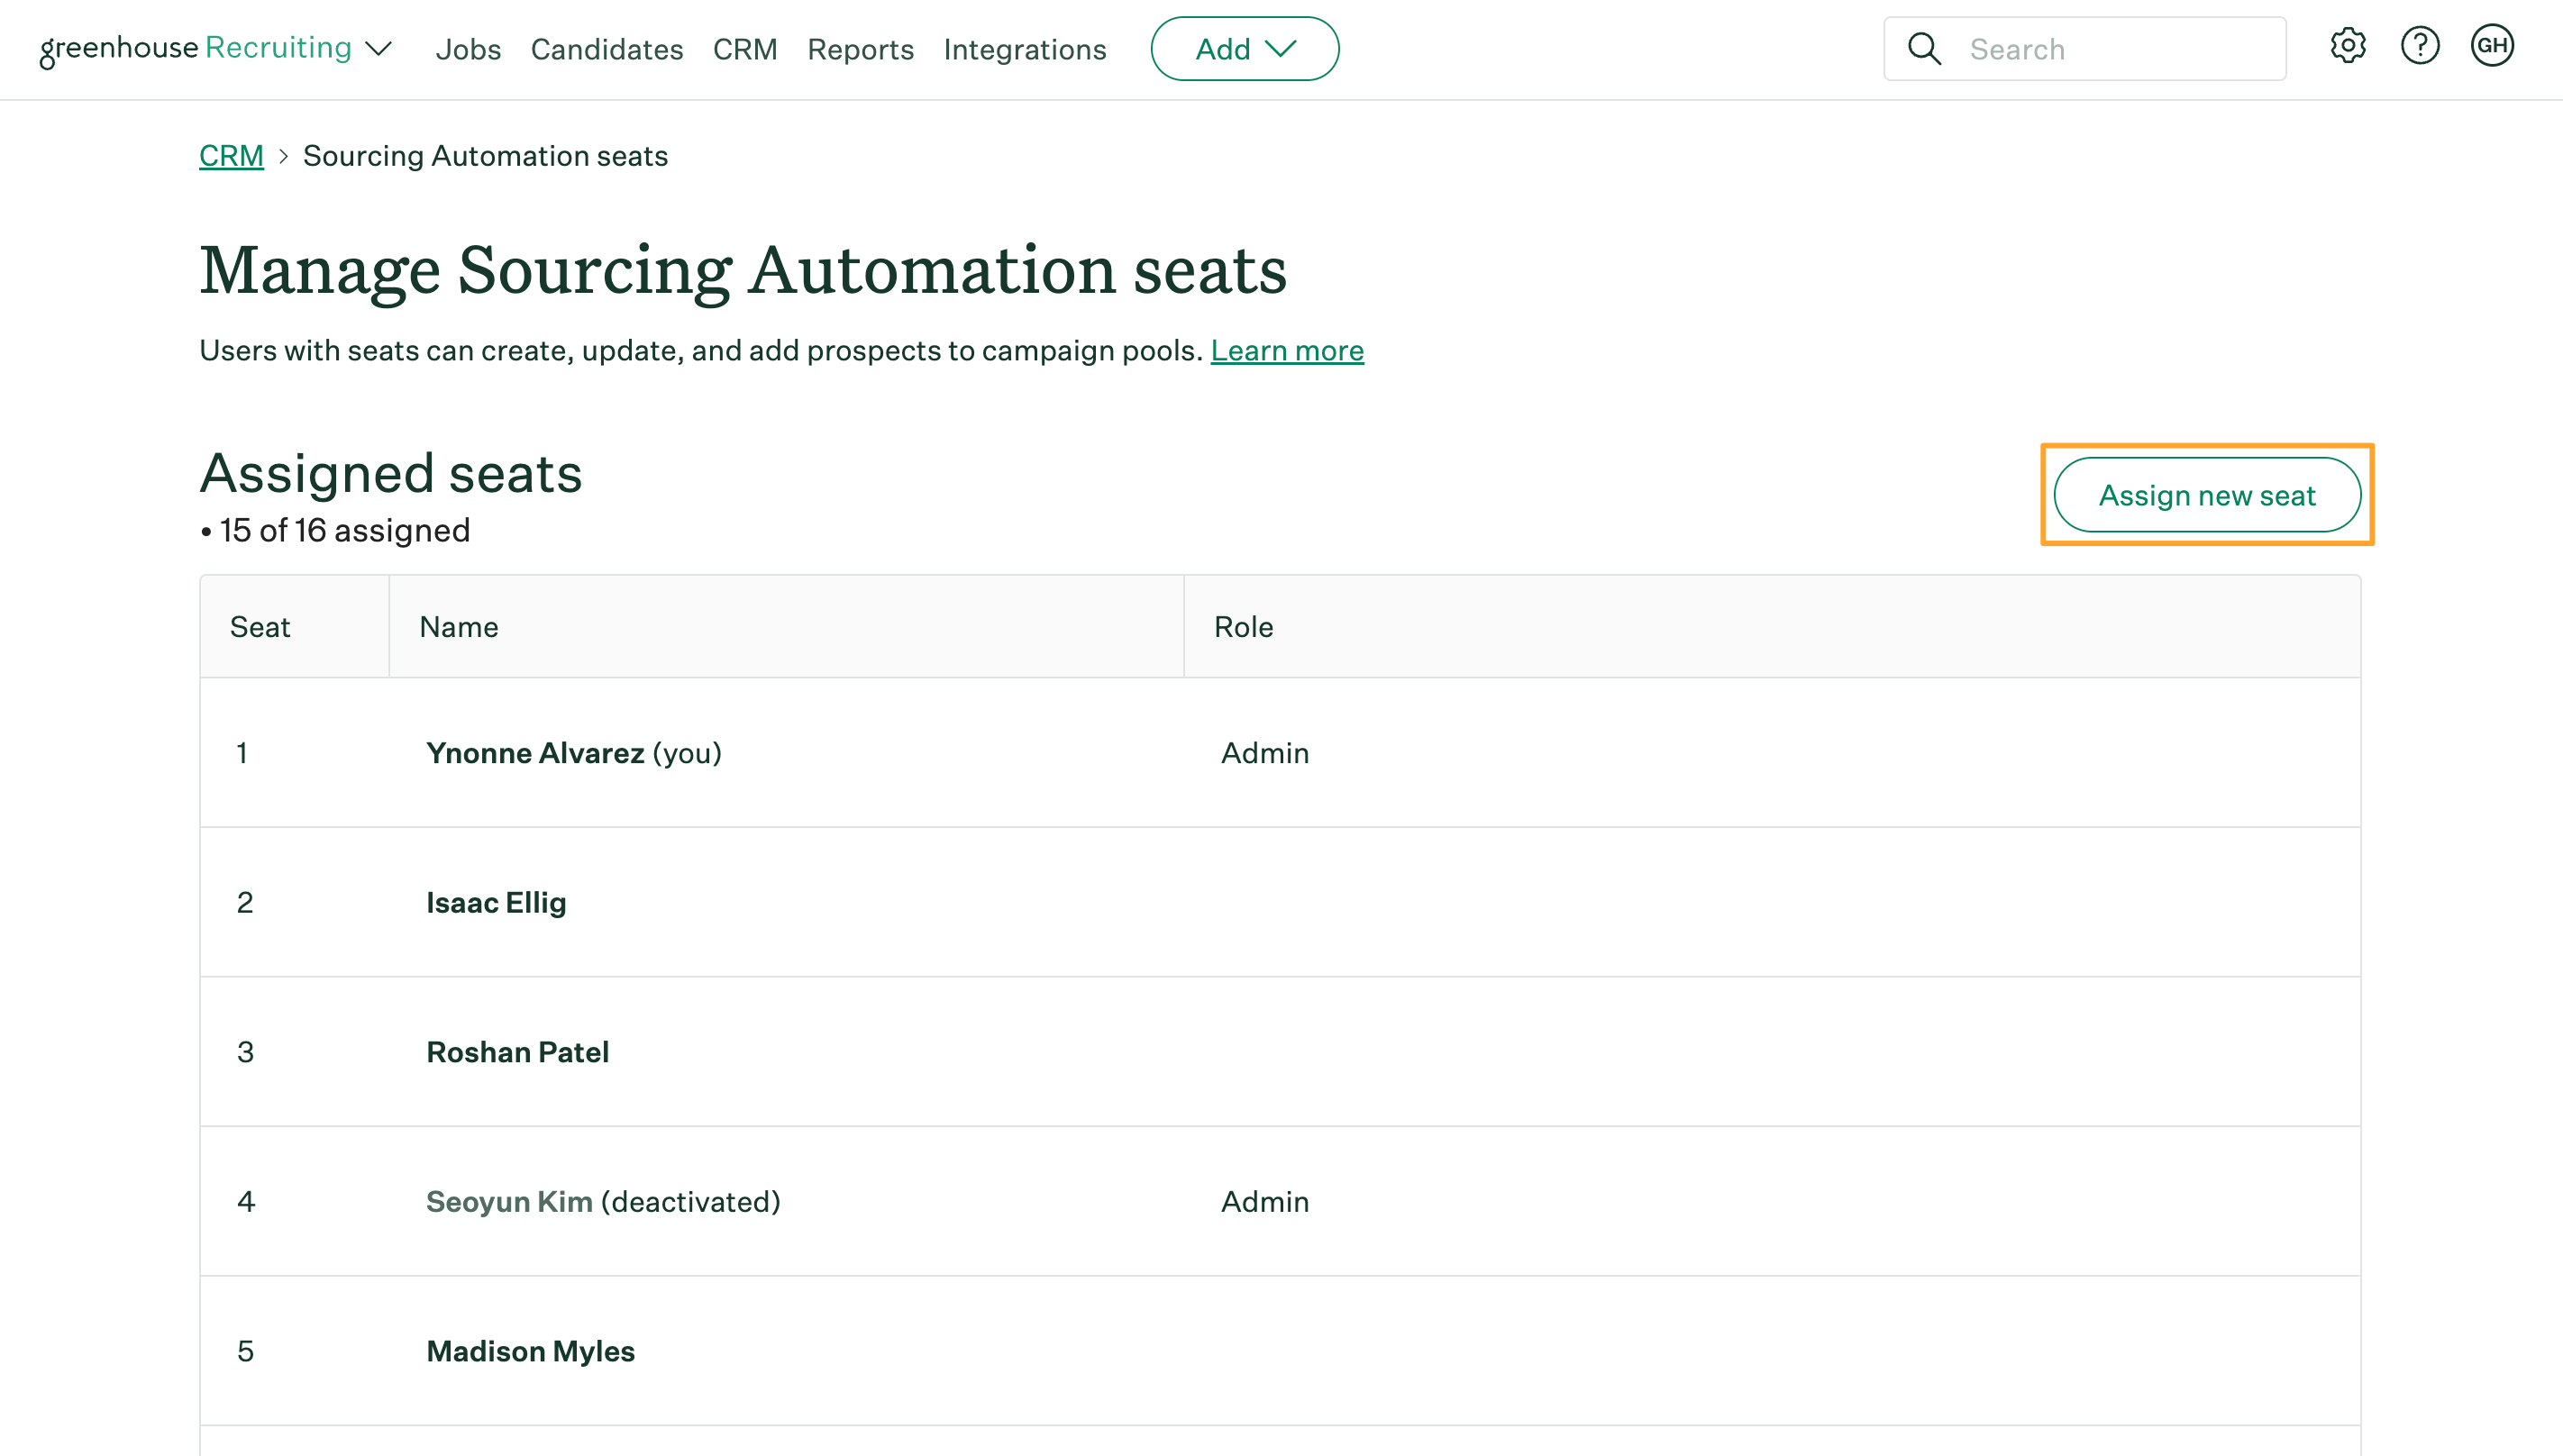 Manage Sourcing Automation seats page with Assign new seat button highlighted